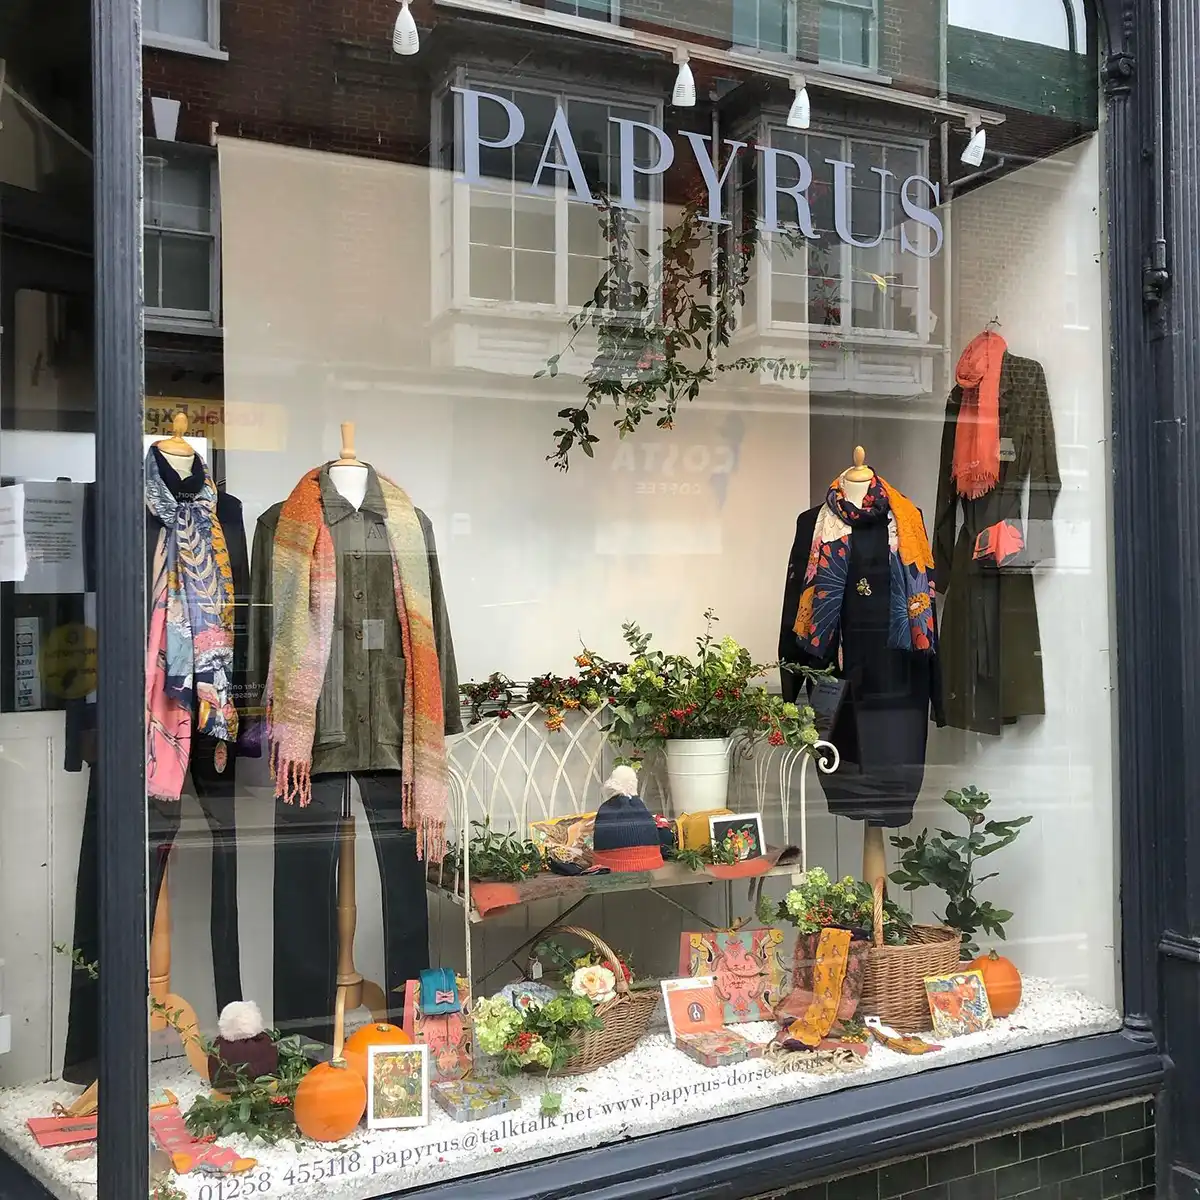 Papyrus has been in Blandford for some 30 years - famed for the window displays